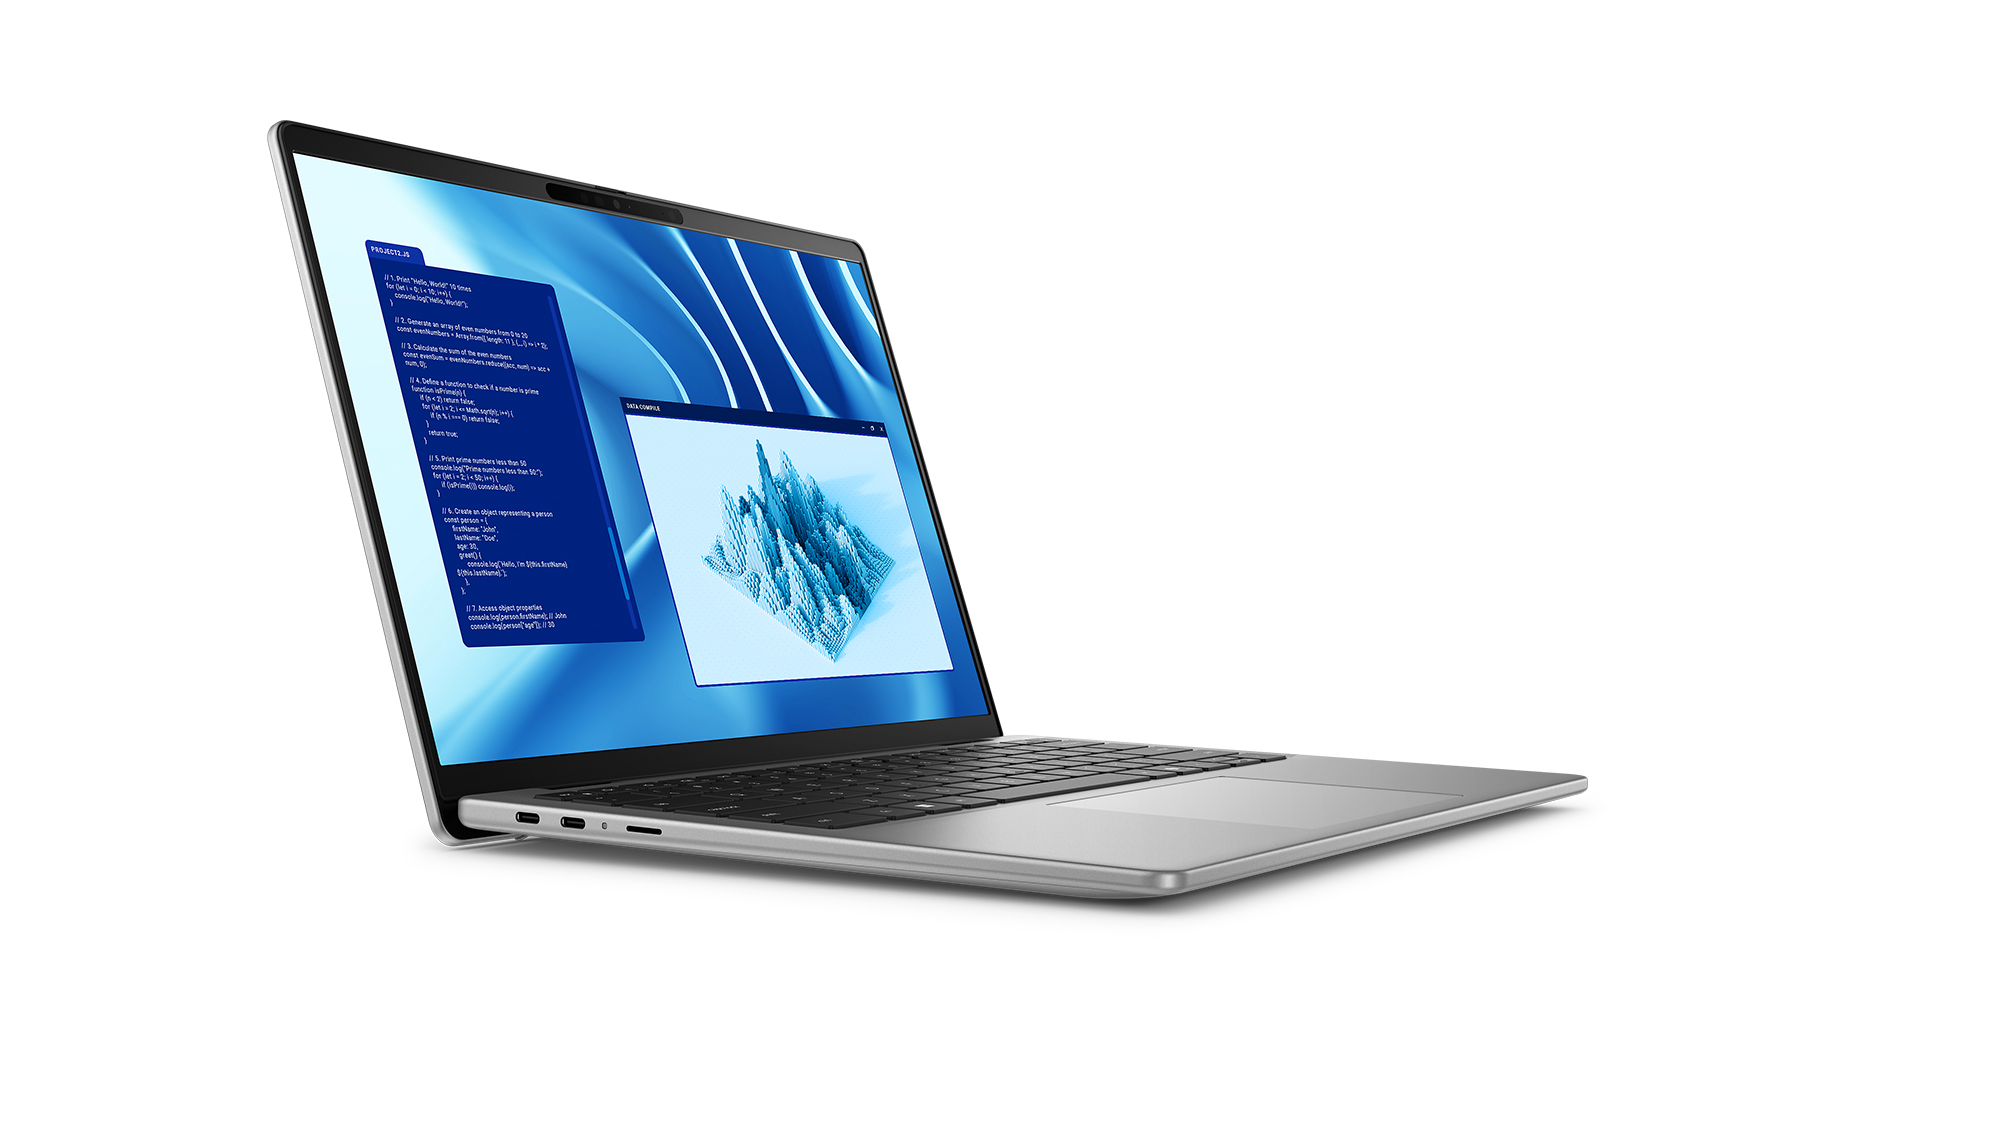 The Dell Latitude 7455 laptop with the Snapdragon X Elite chip.